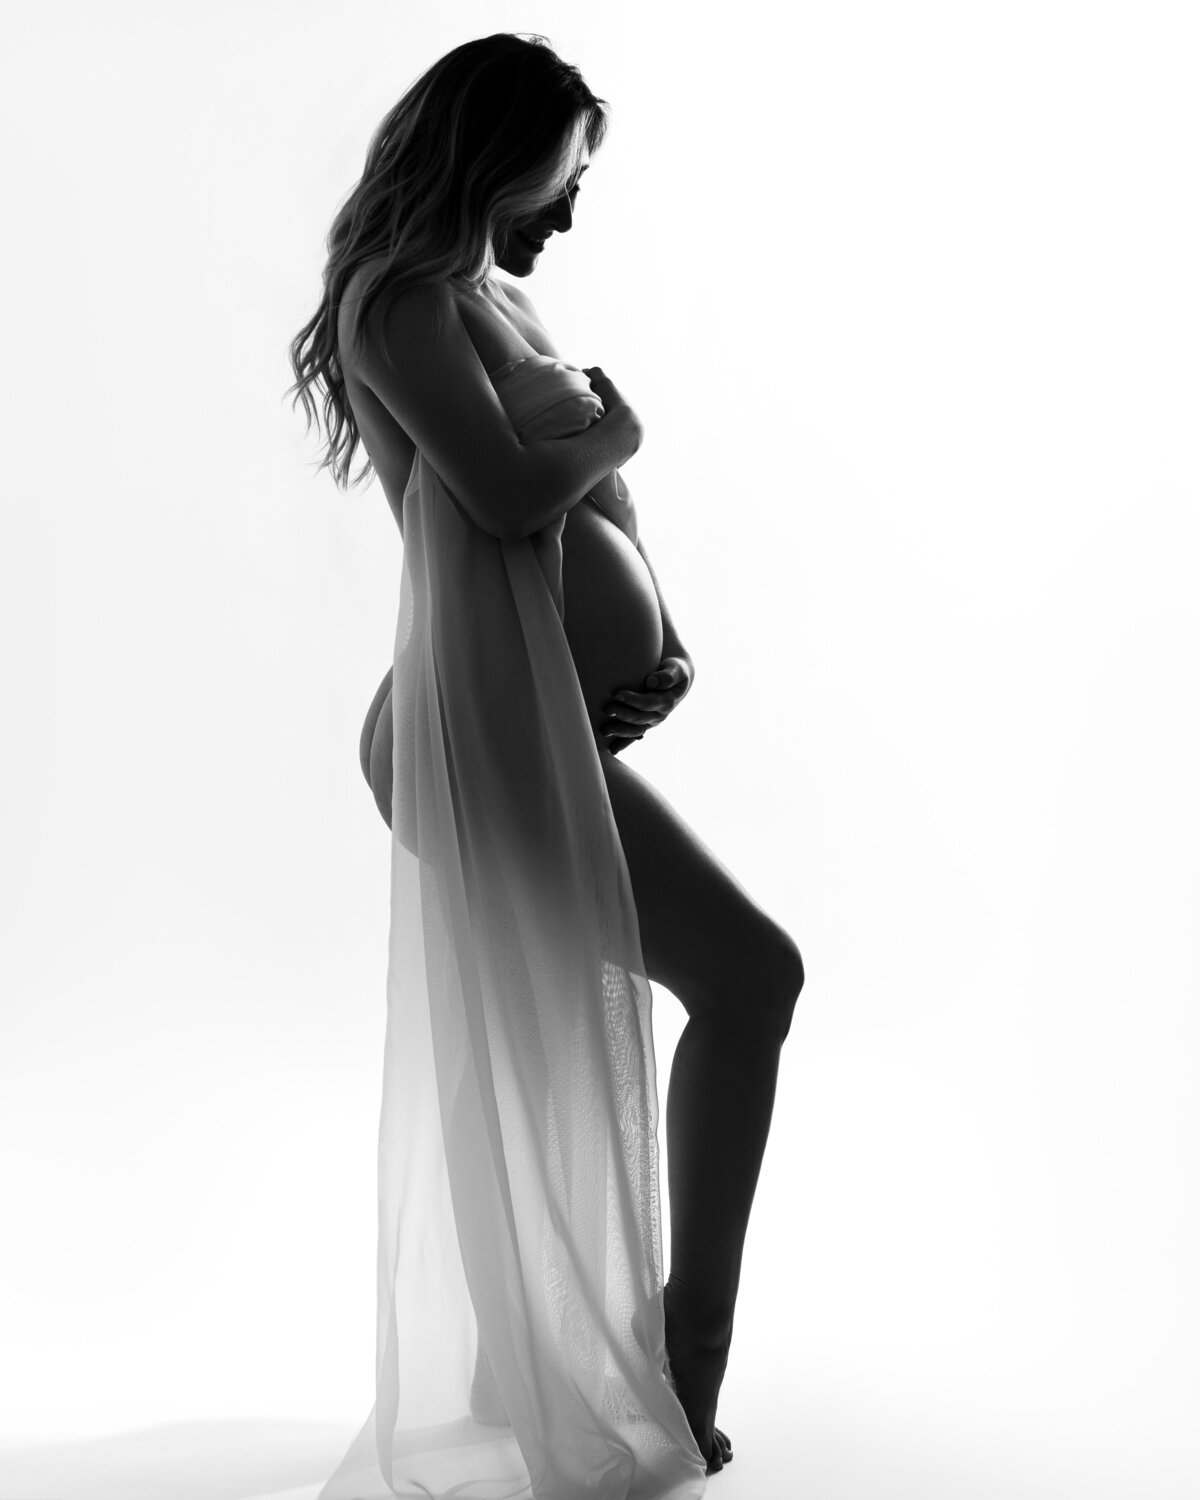 Artistic maternity photography